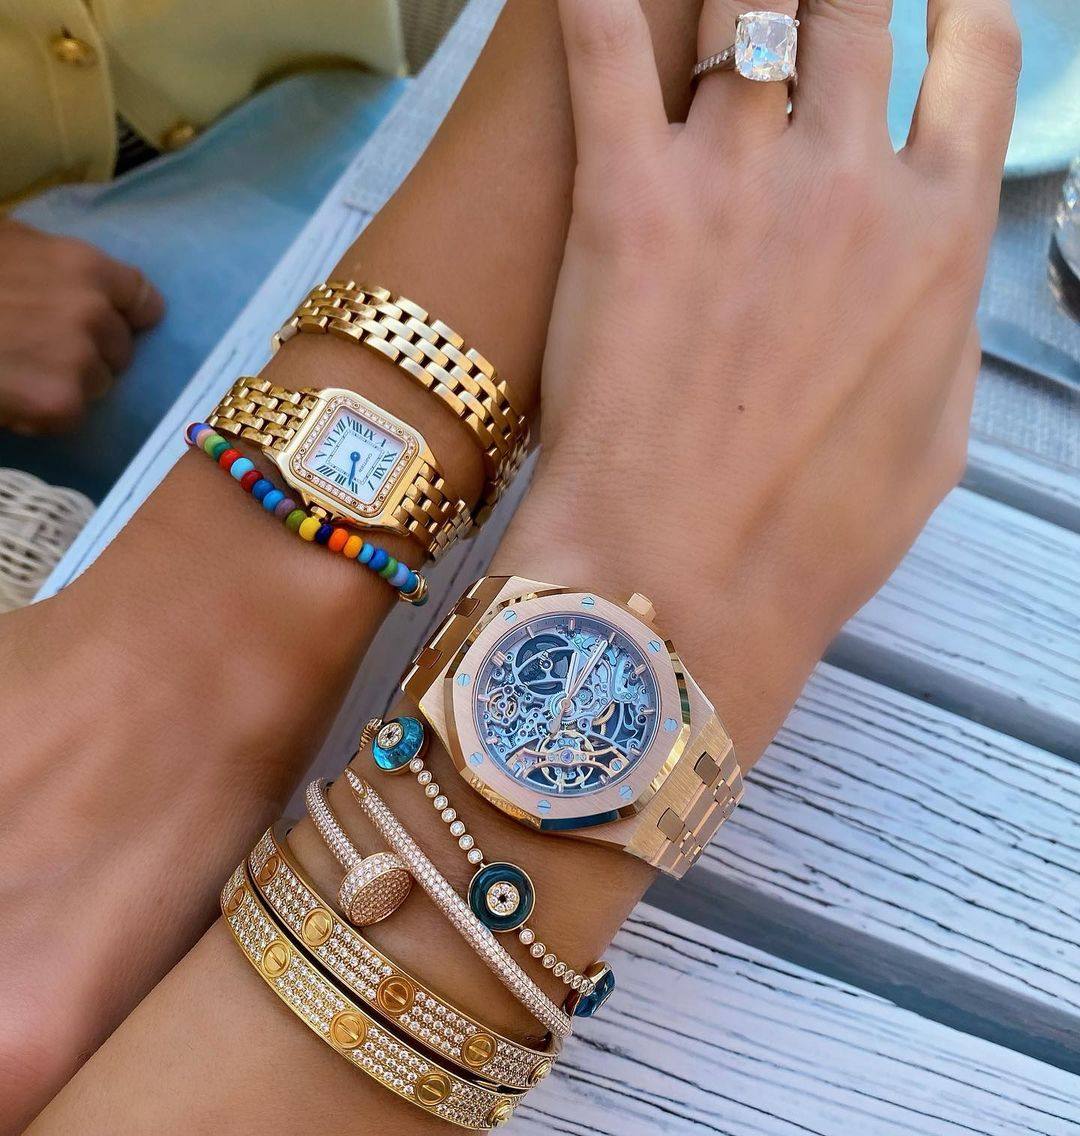 This video made Instagram shut down the account of a Dubai based influencer  / personal shopper - Luxurylaunches